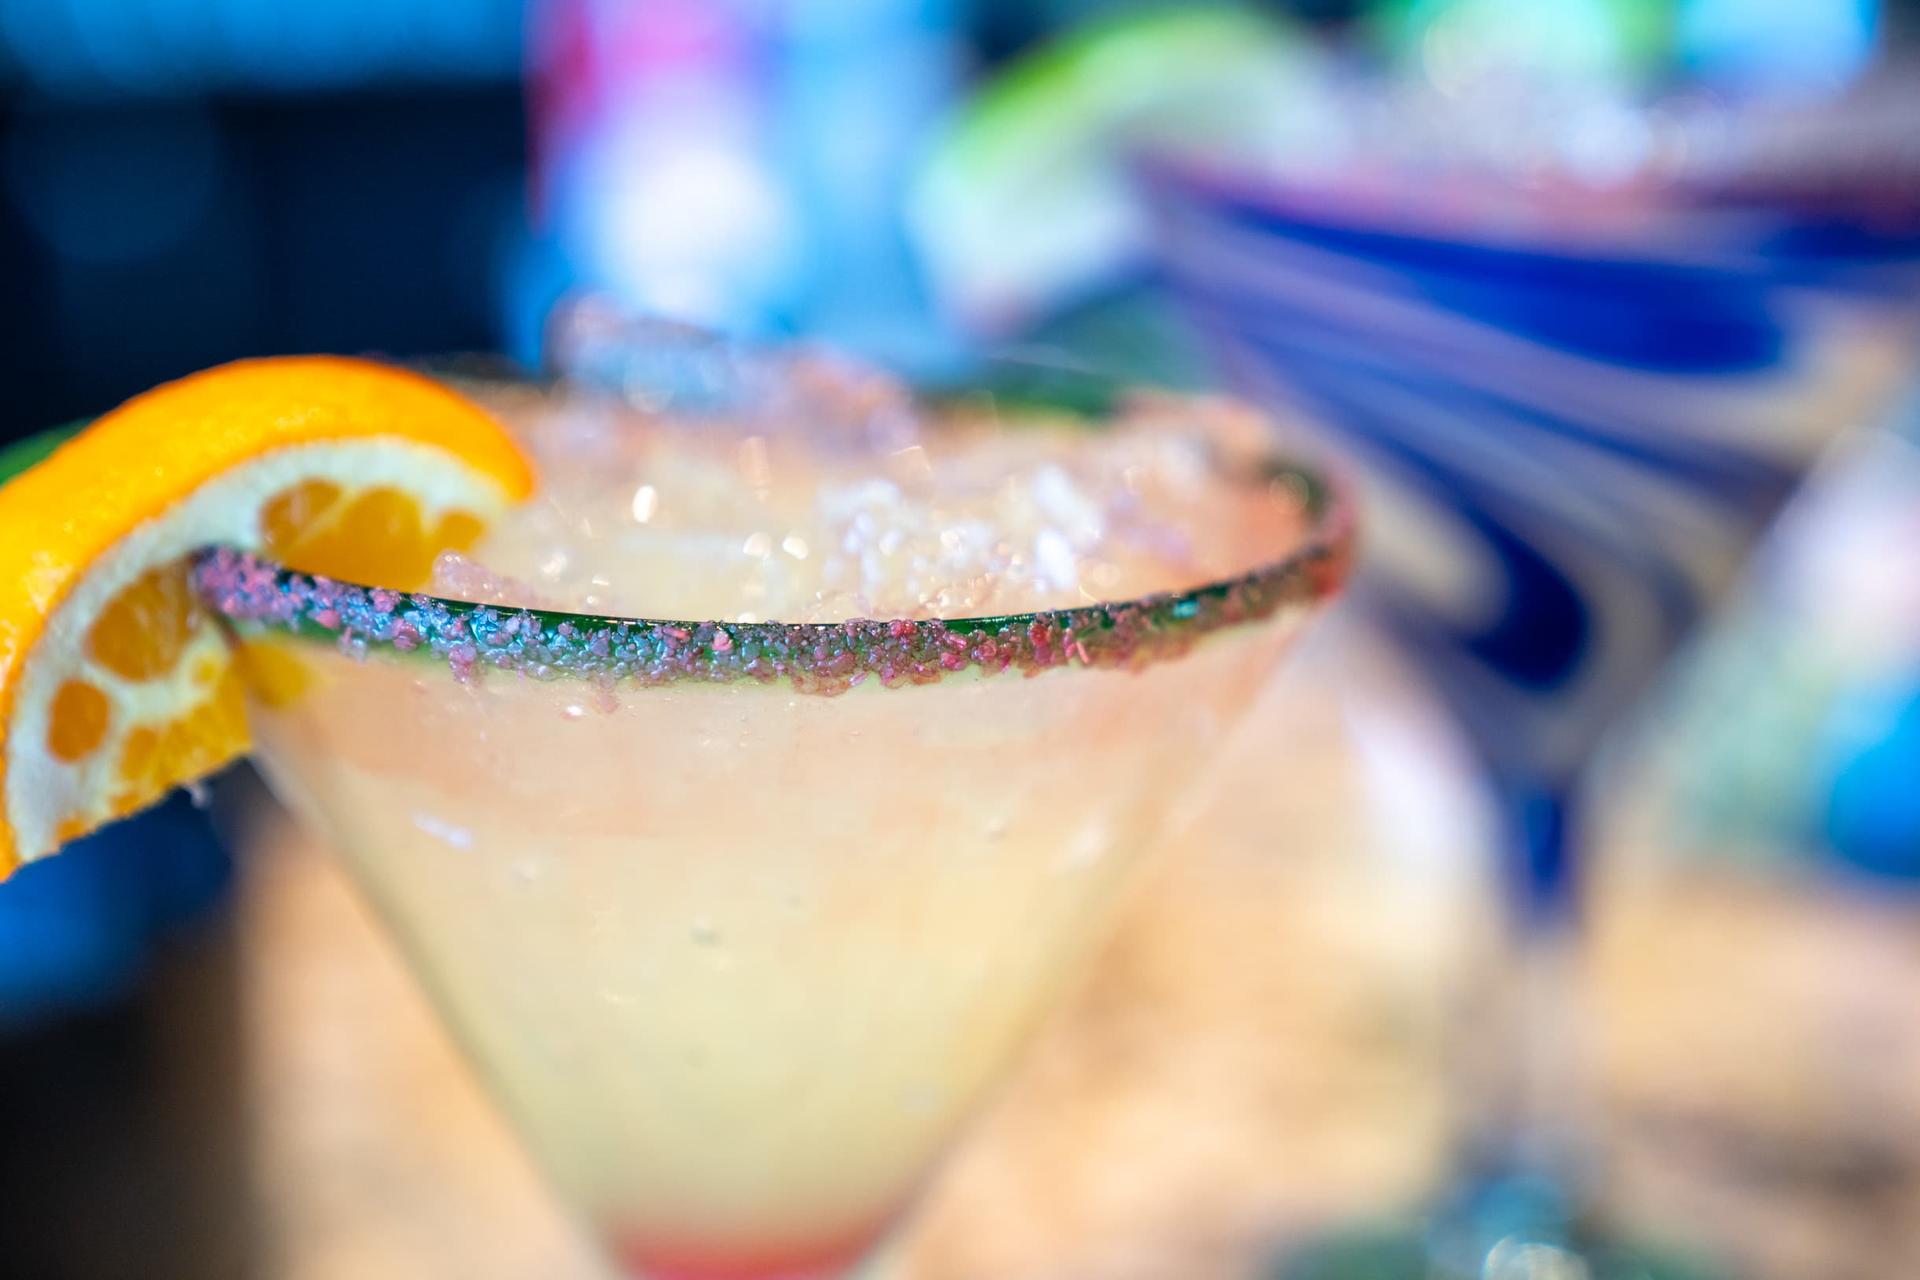 Margarita Mondays always start the week off right! Come in and treat yourself! 